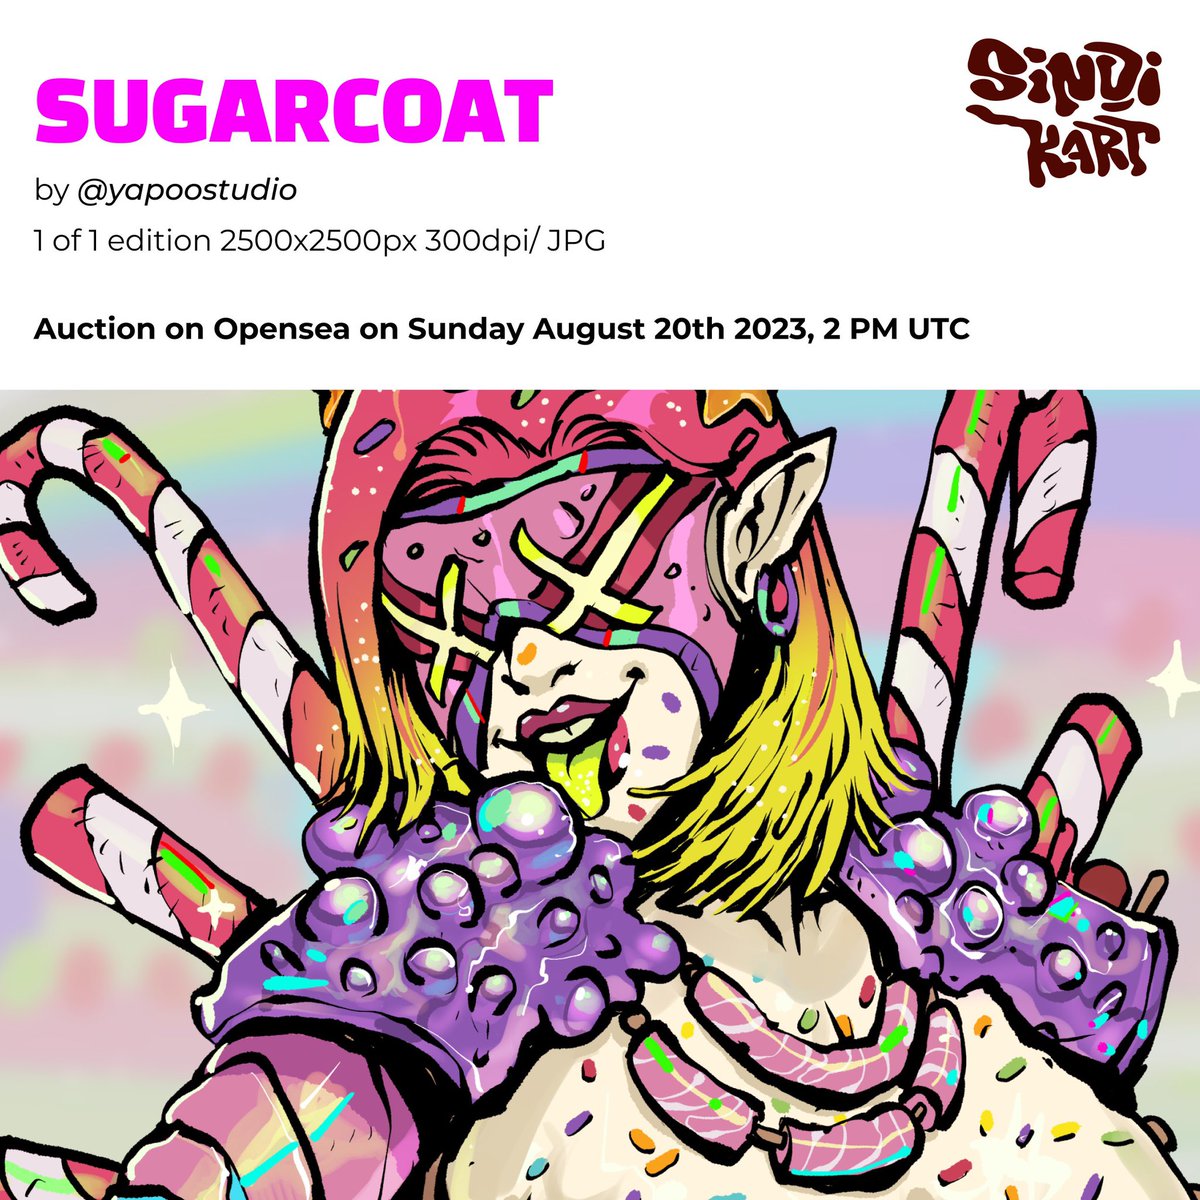 Sweets everywhere… SUGARCOAT by @yapoostudio “She is the sweetest assassin you’ll ever face”